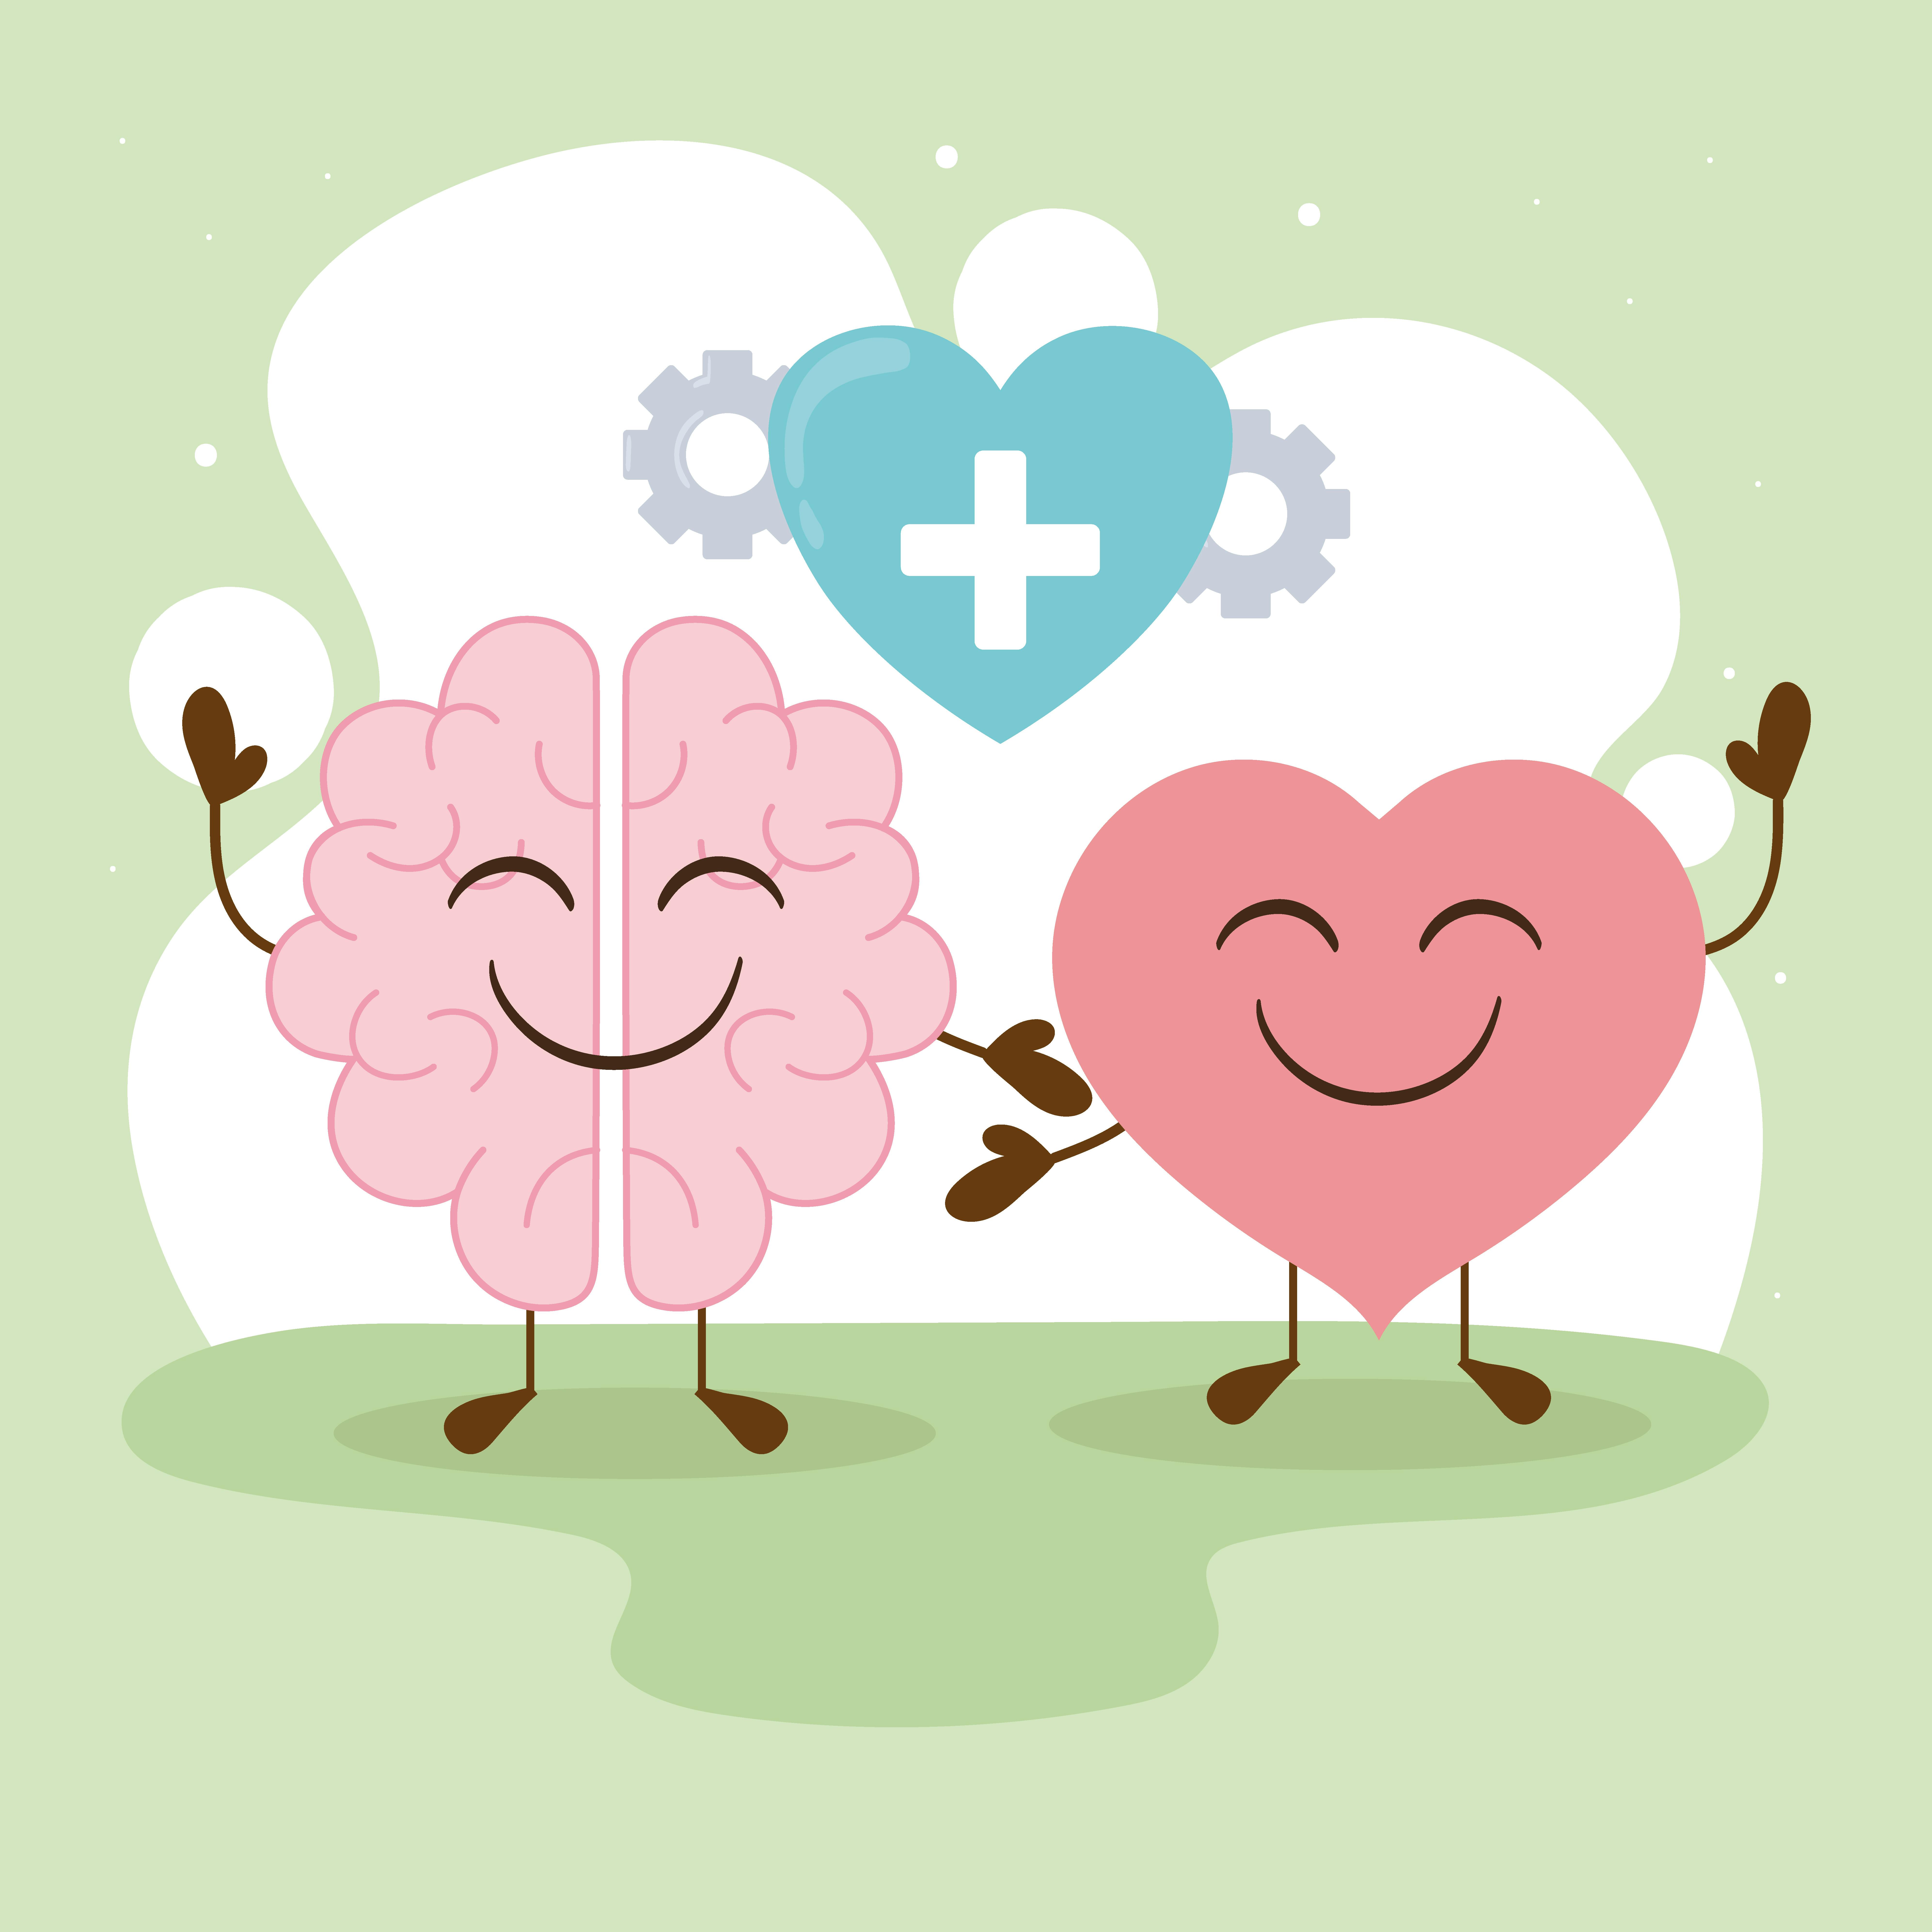 The connection between pediatric heart issues and mental health